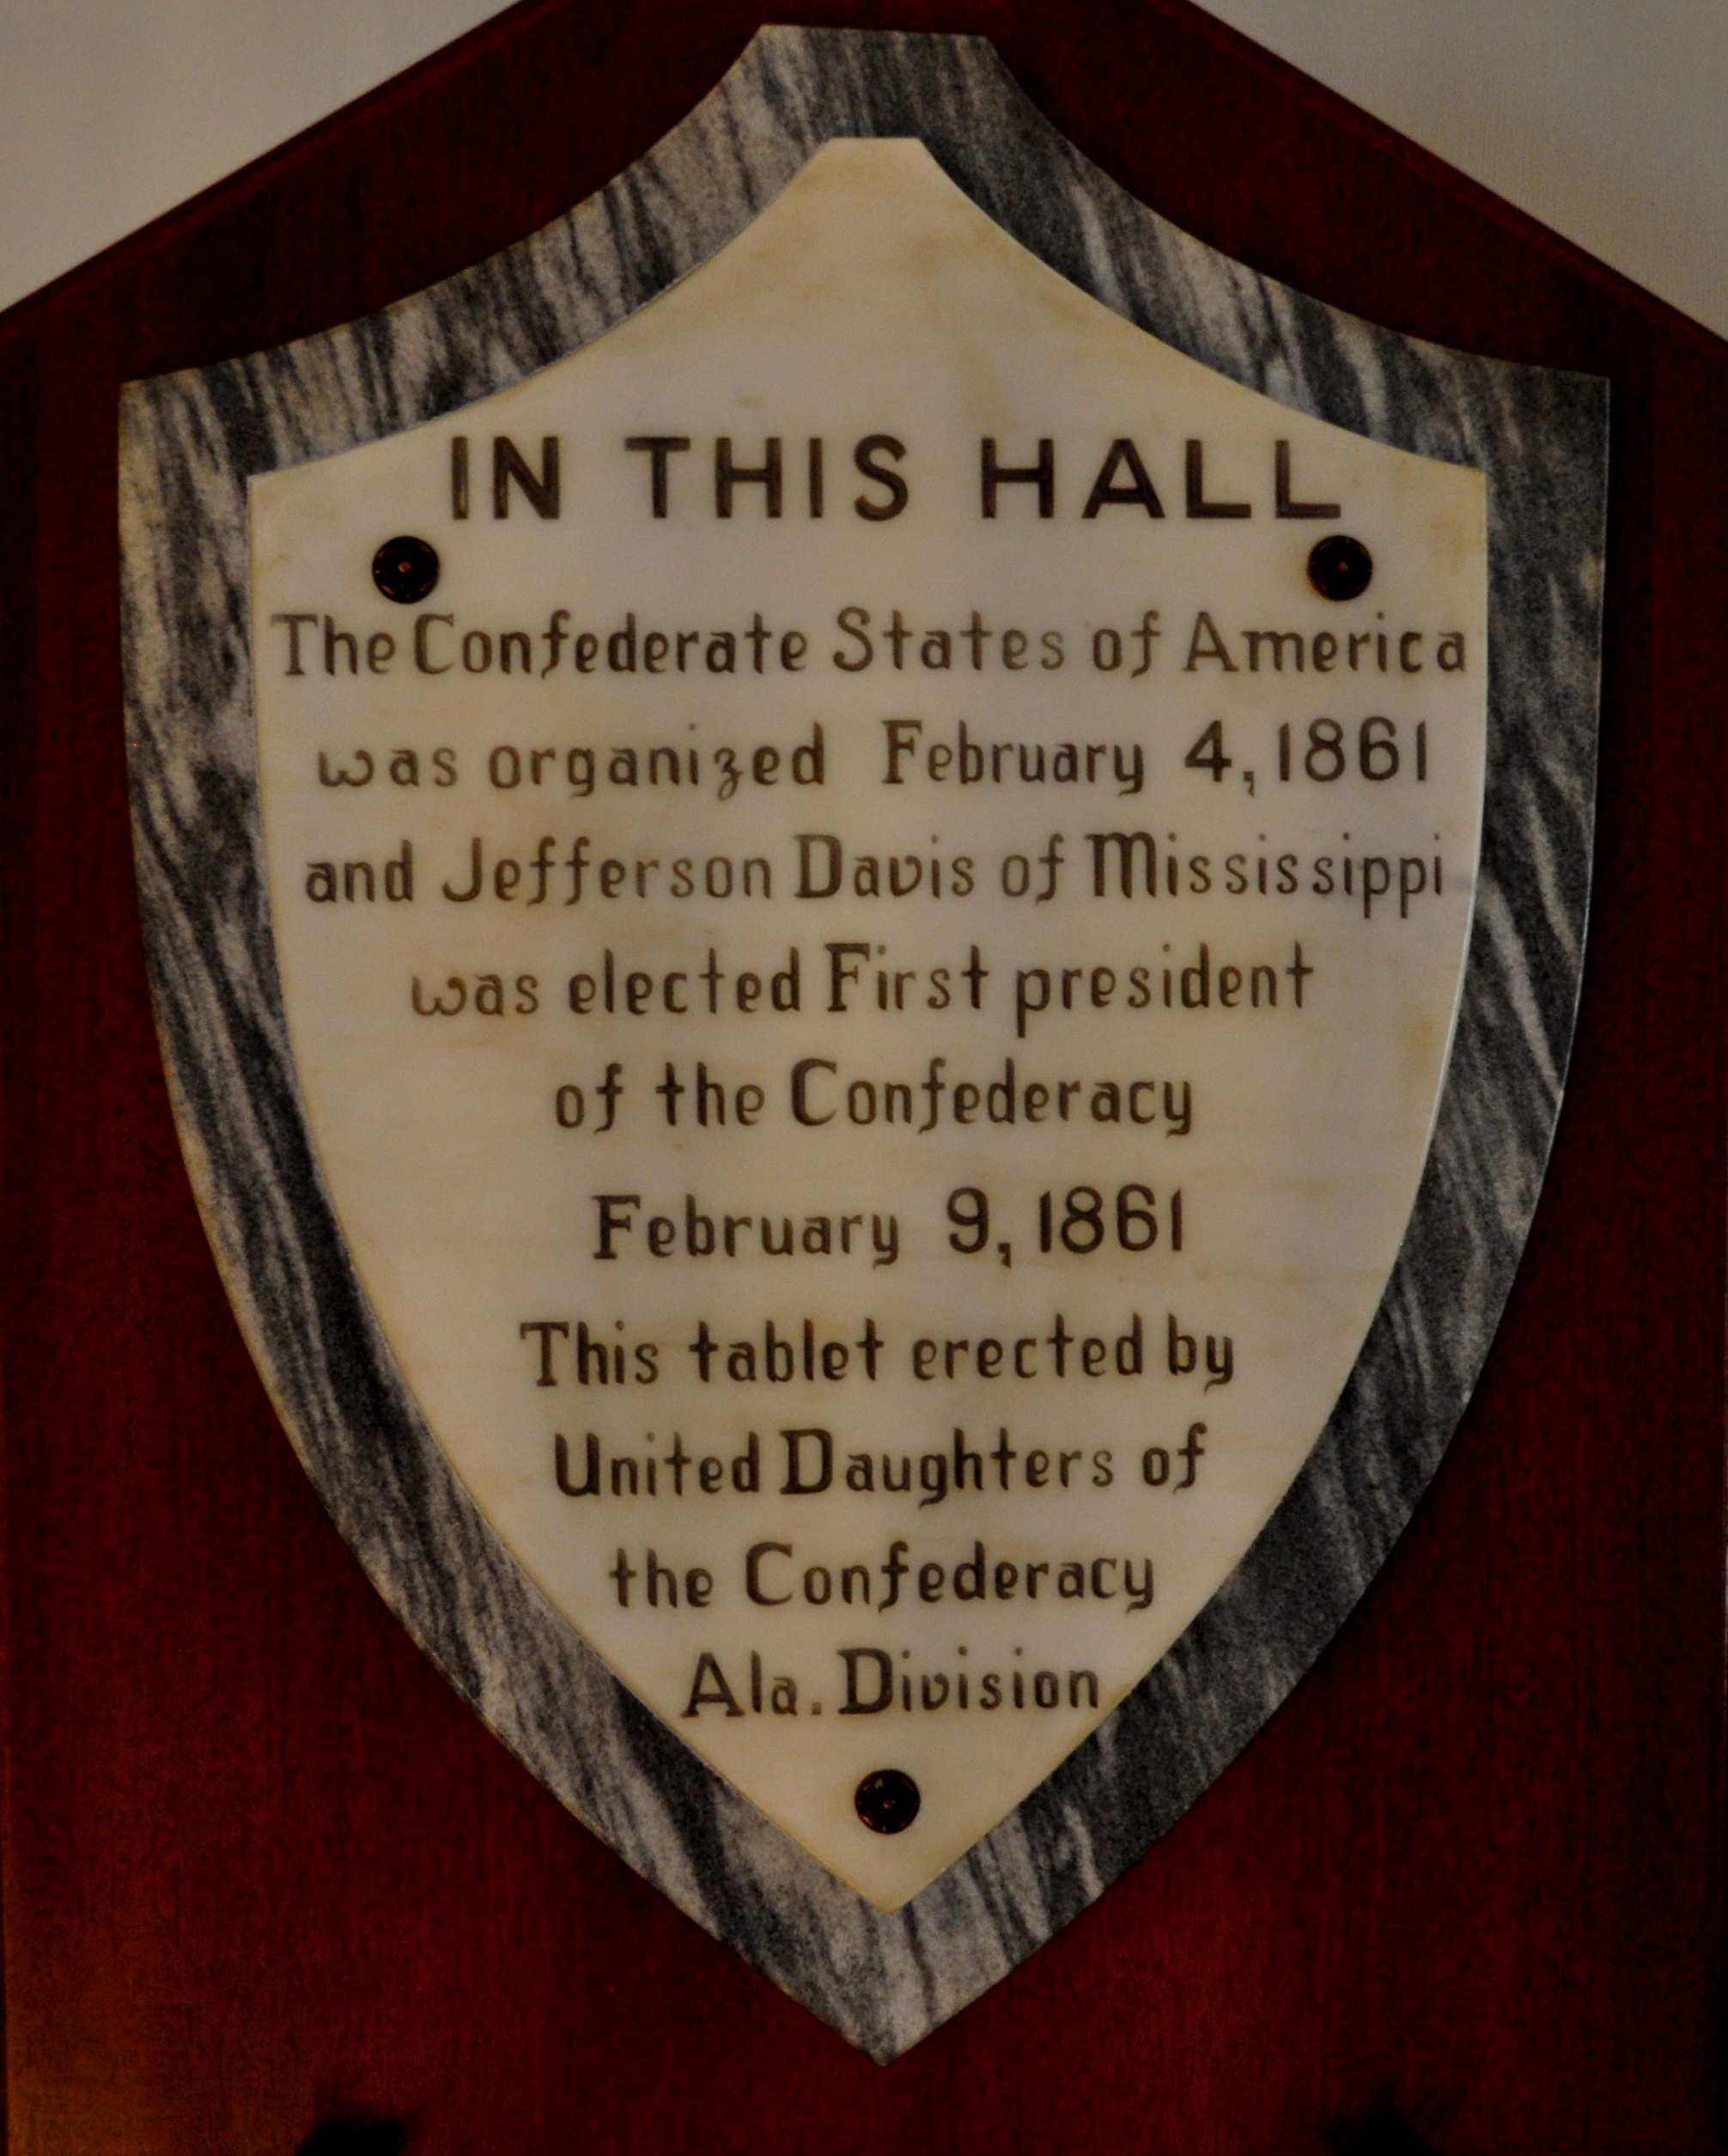 State-Capitol-Election-of-Jefferson-Davis-as-President-of-teh-CSA-Plaque-in-the-Senate-Chamber-Montgomery-AL-2013-12-09.jpg